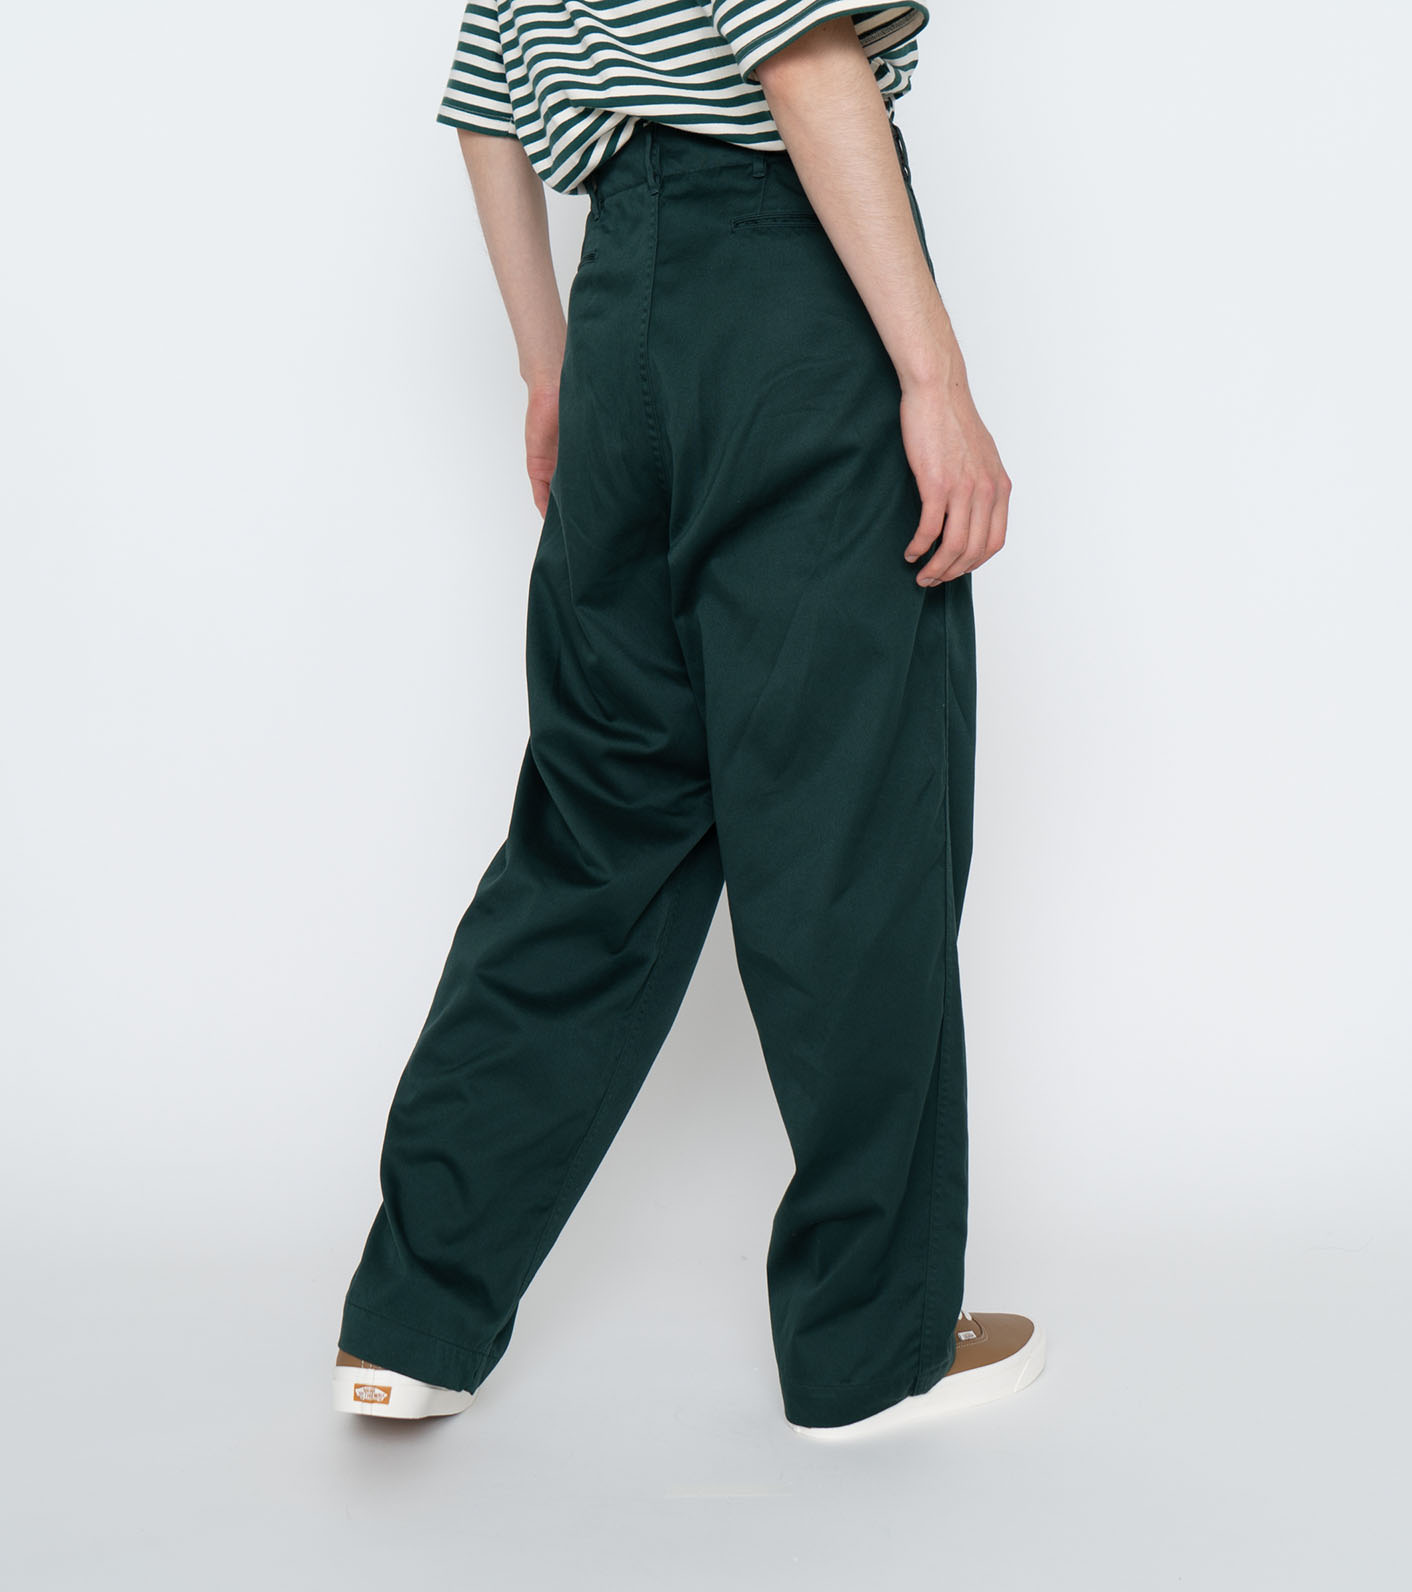 SEAL限定商品】 Wide Pleat Double パンツ Chino nanamica Pants 